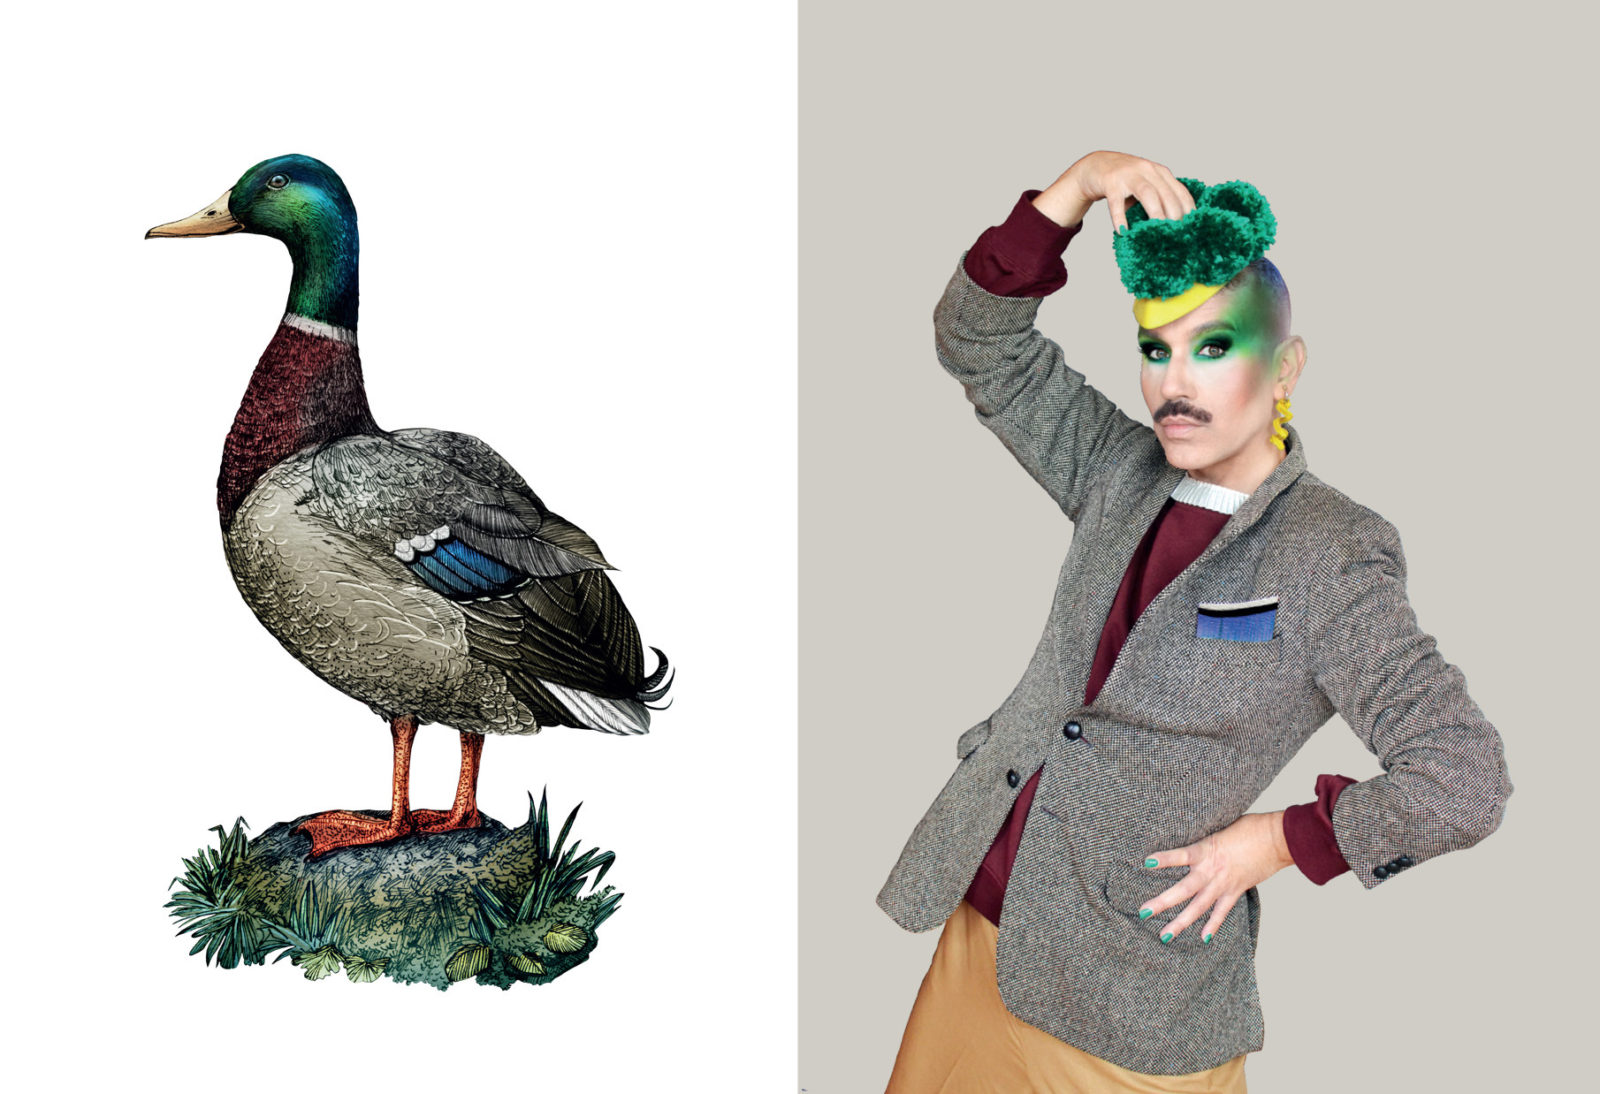 Paul Harfleet is photographed dressed up as a Mallard. He wears a tweed jacket with a blue pocket square and a green head piece. His eyeshadow is emerald green and spreads up to his temples. Next to him is a detailed illustration of a mallard.